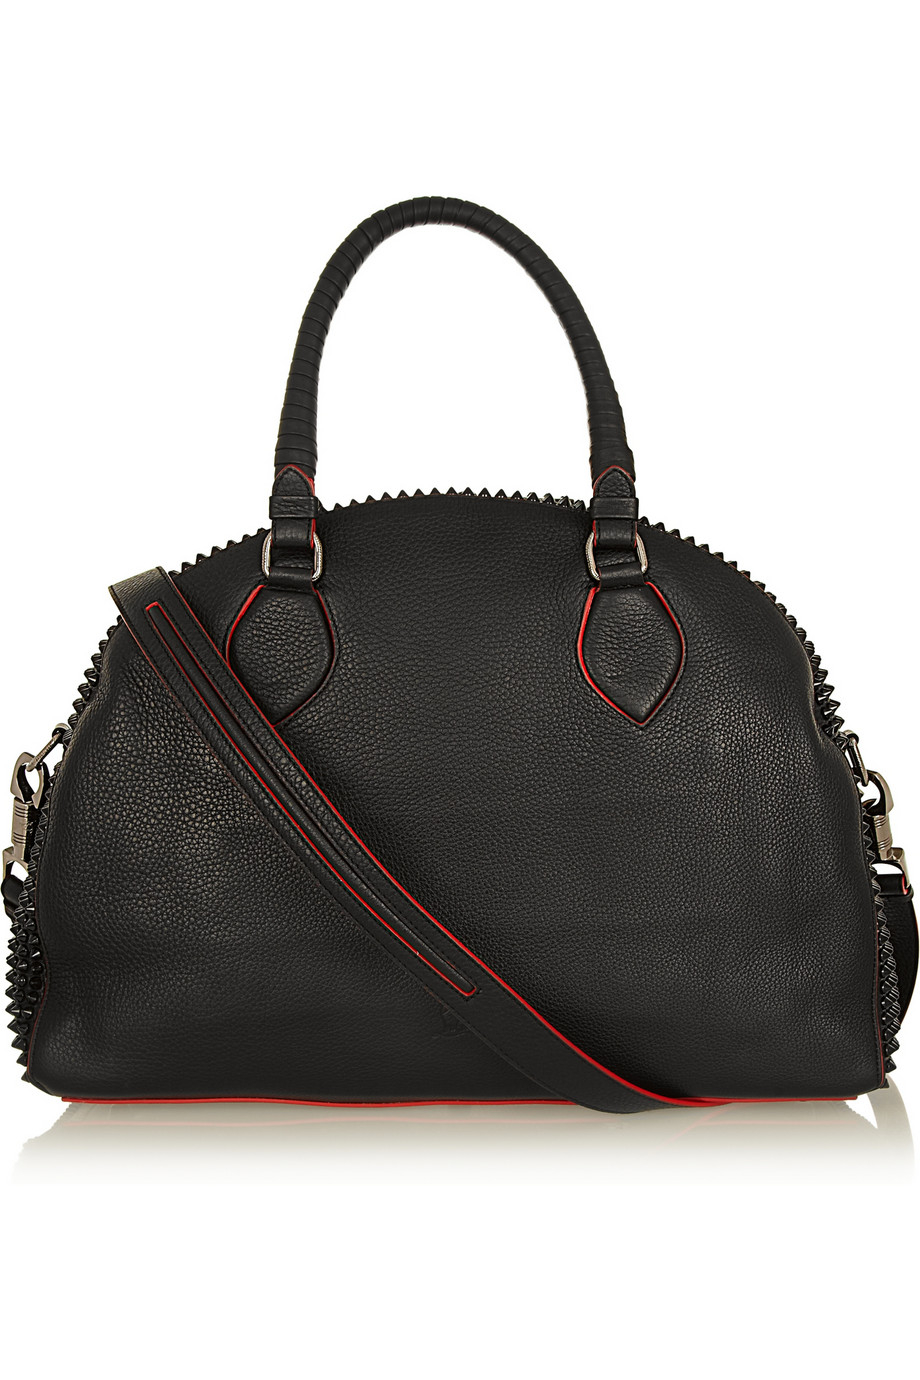 Christian Louboutin Panettone Large Spiked Texturedleather Tote in Black | Lyst